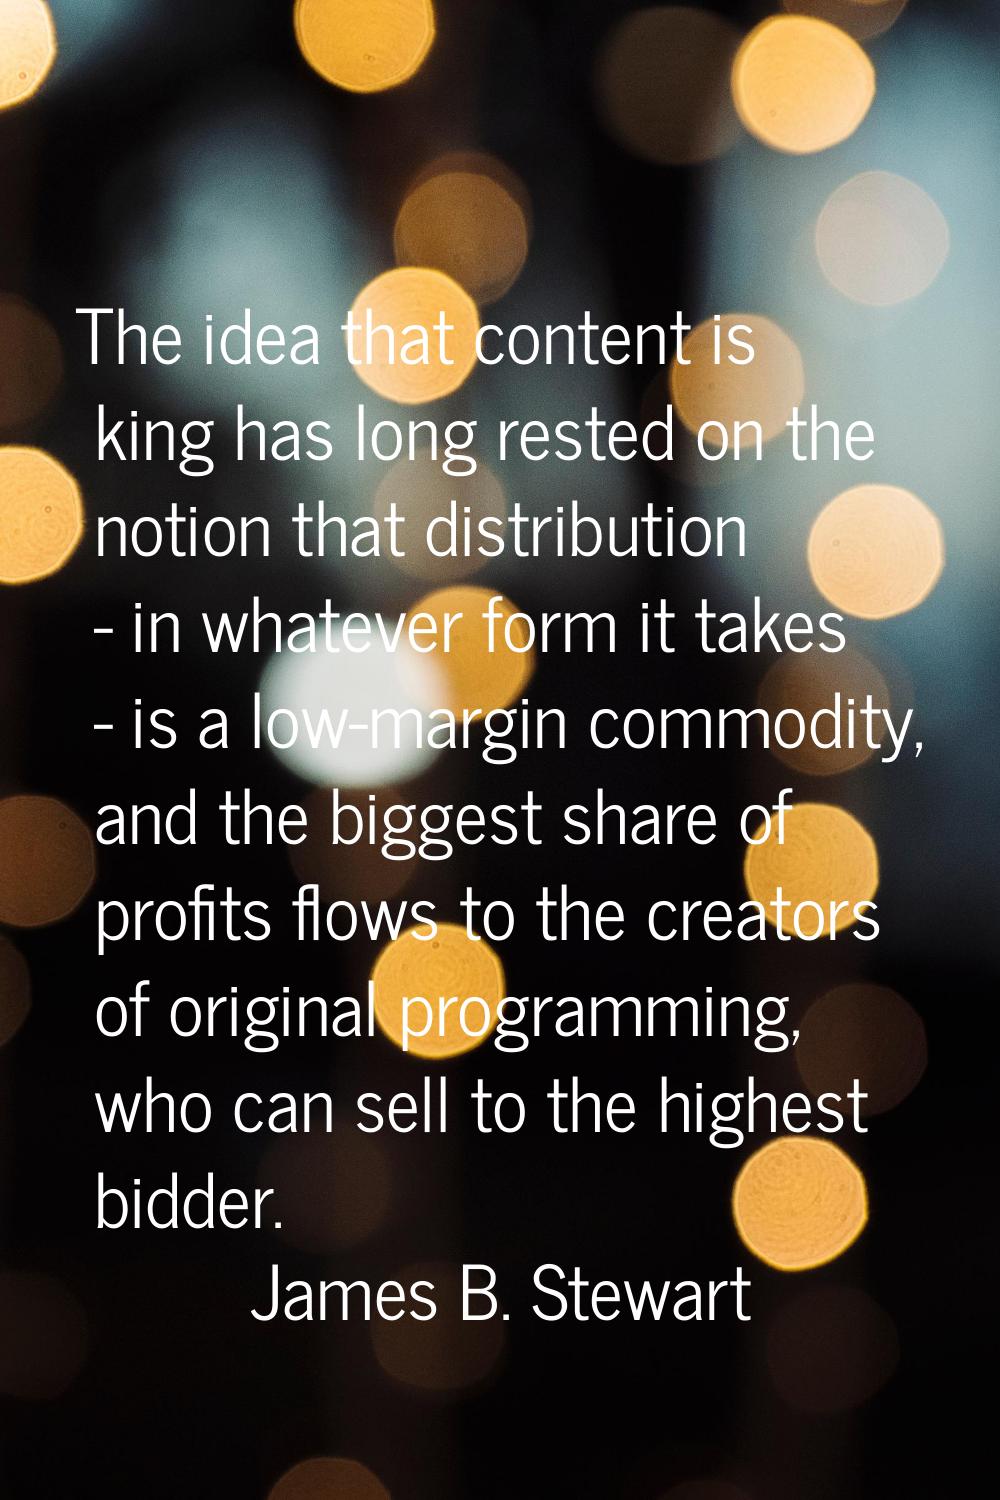 The idea that content is king has long rested on the notion that distribution - in whatever form it